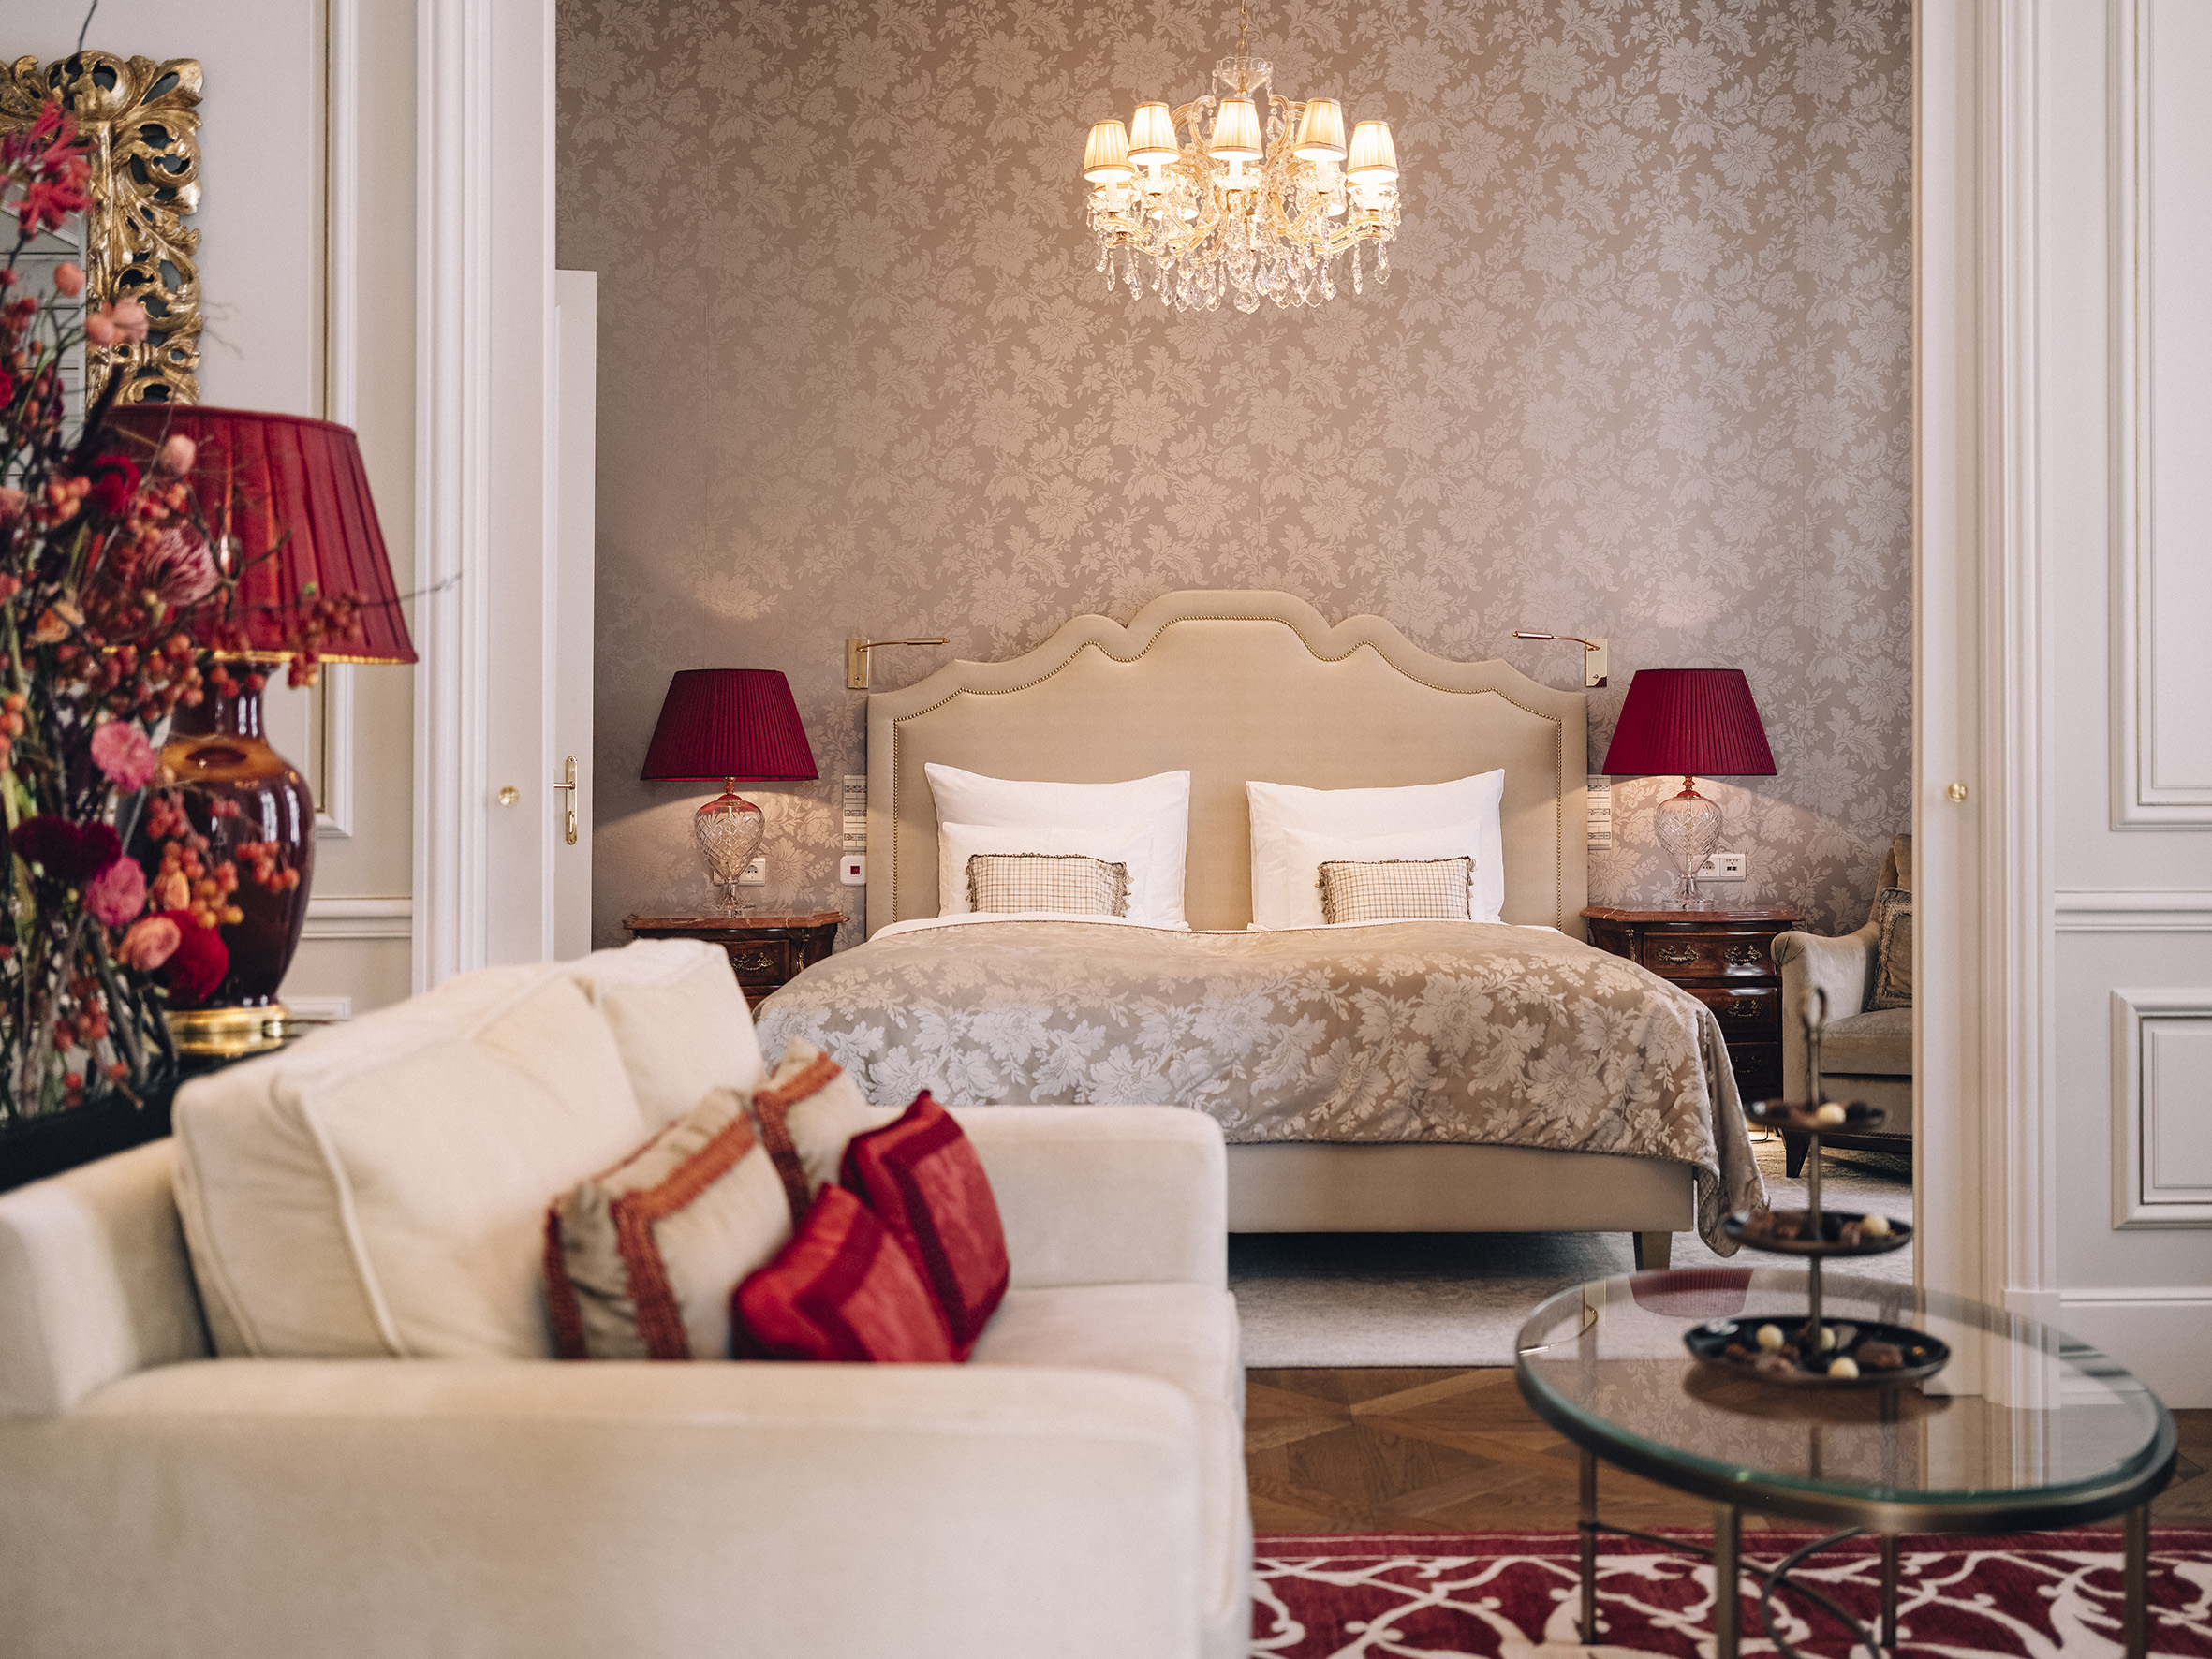 Madame Butterfly Suite Hotel Sacher